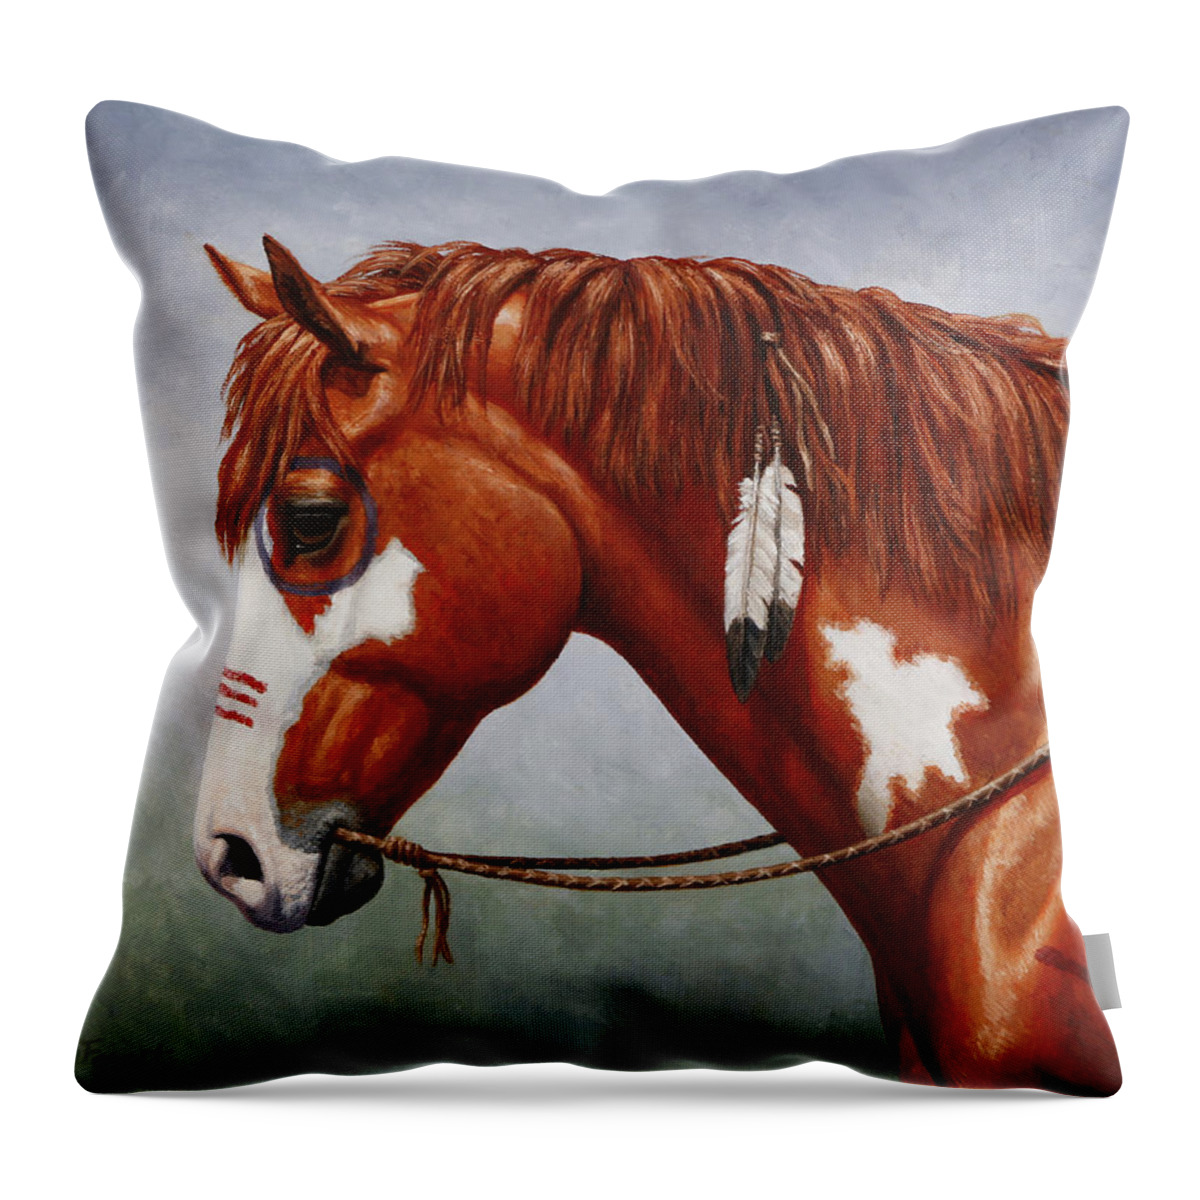 Horse Throw Pillow featuring the painting Native American War Horse by Crista Forest